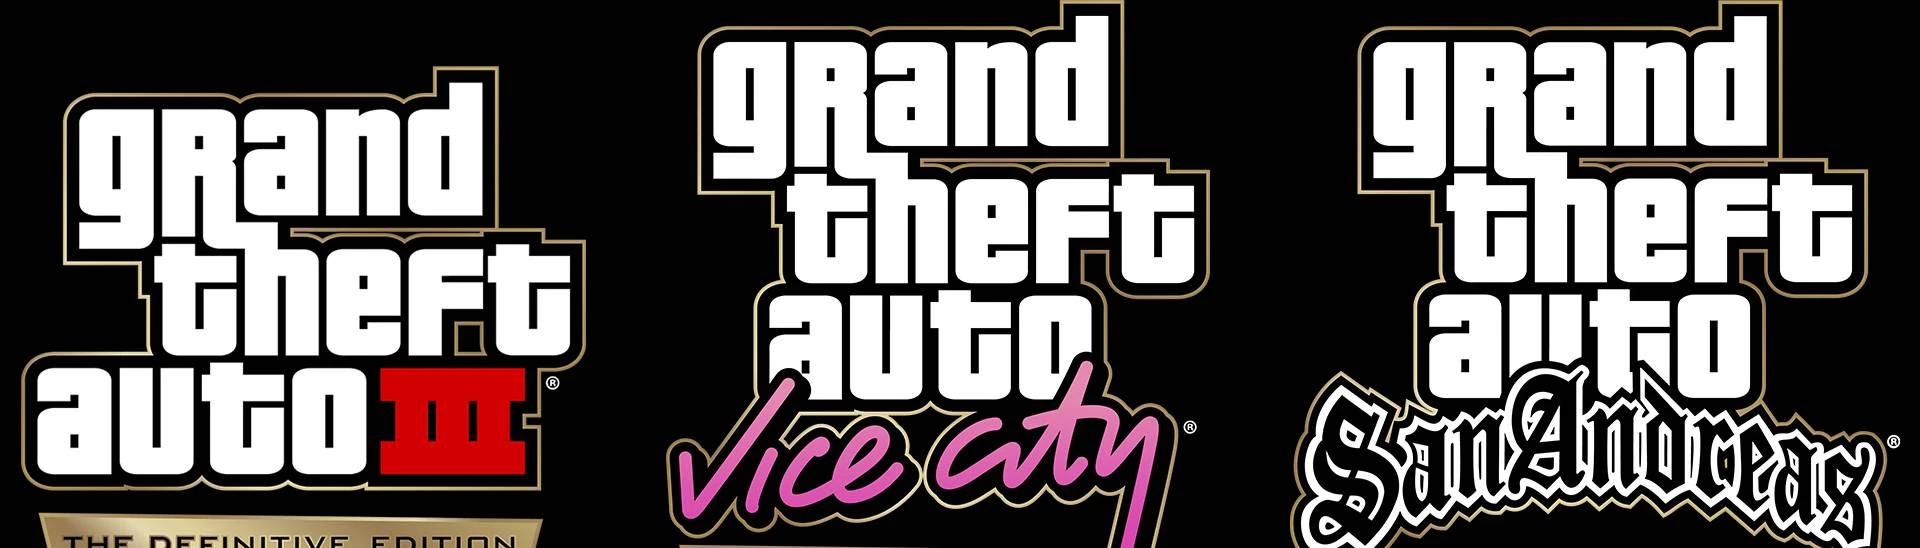 Grand Theft Auto Vanilla Vice Mod Version 1.1 available for download